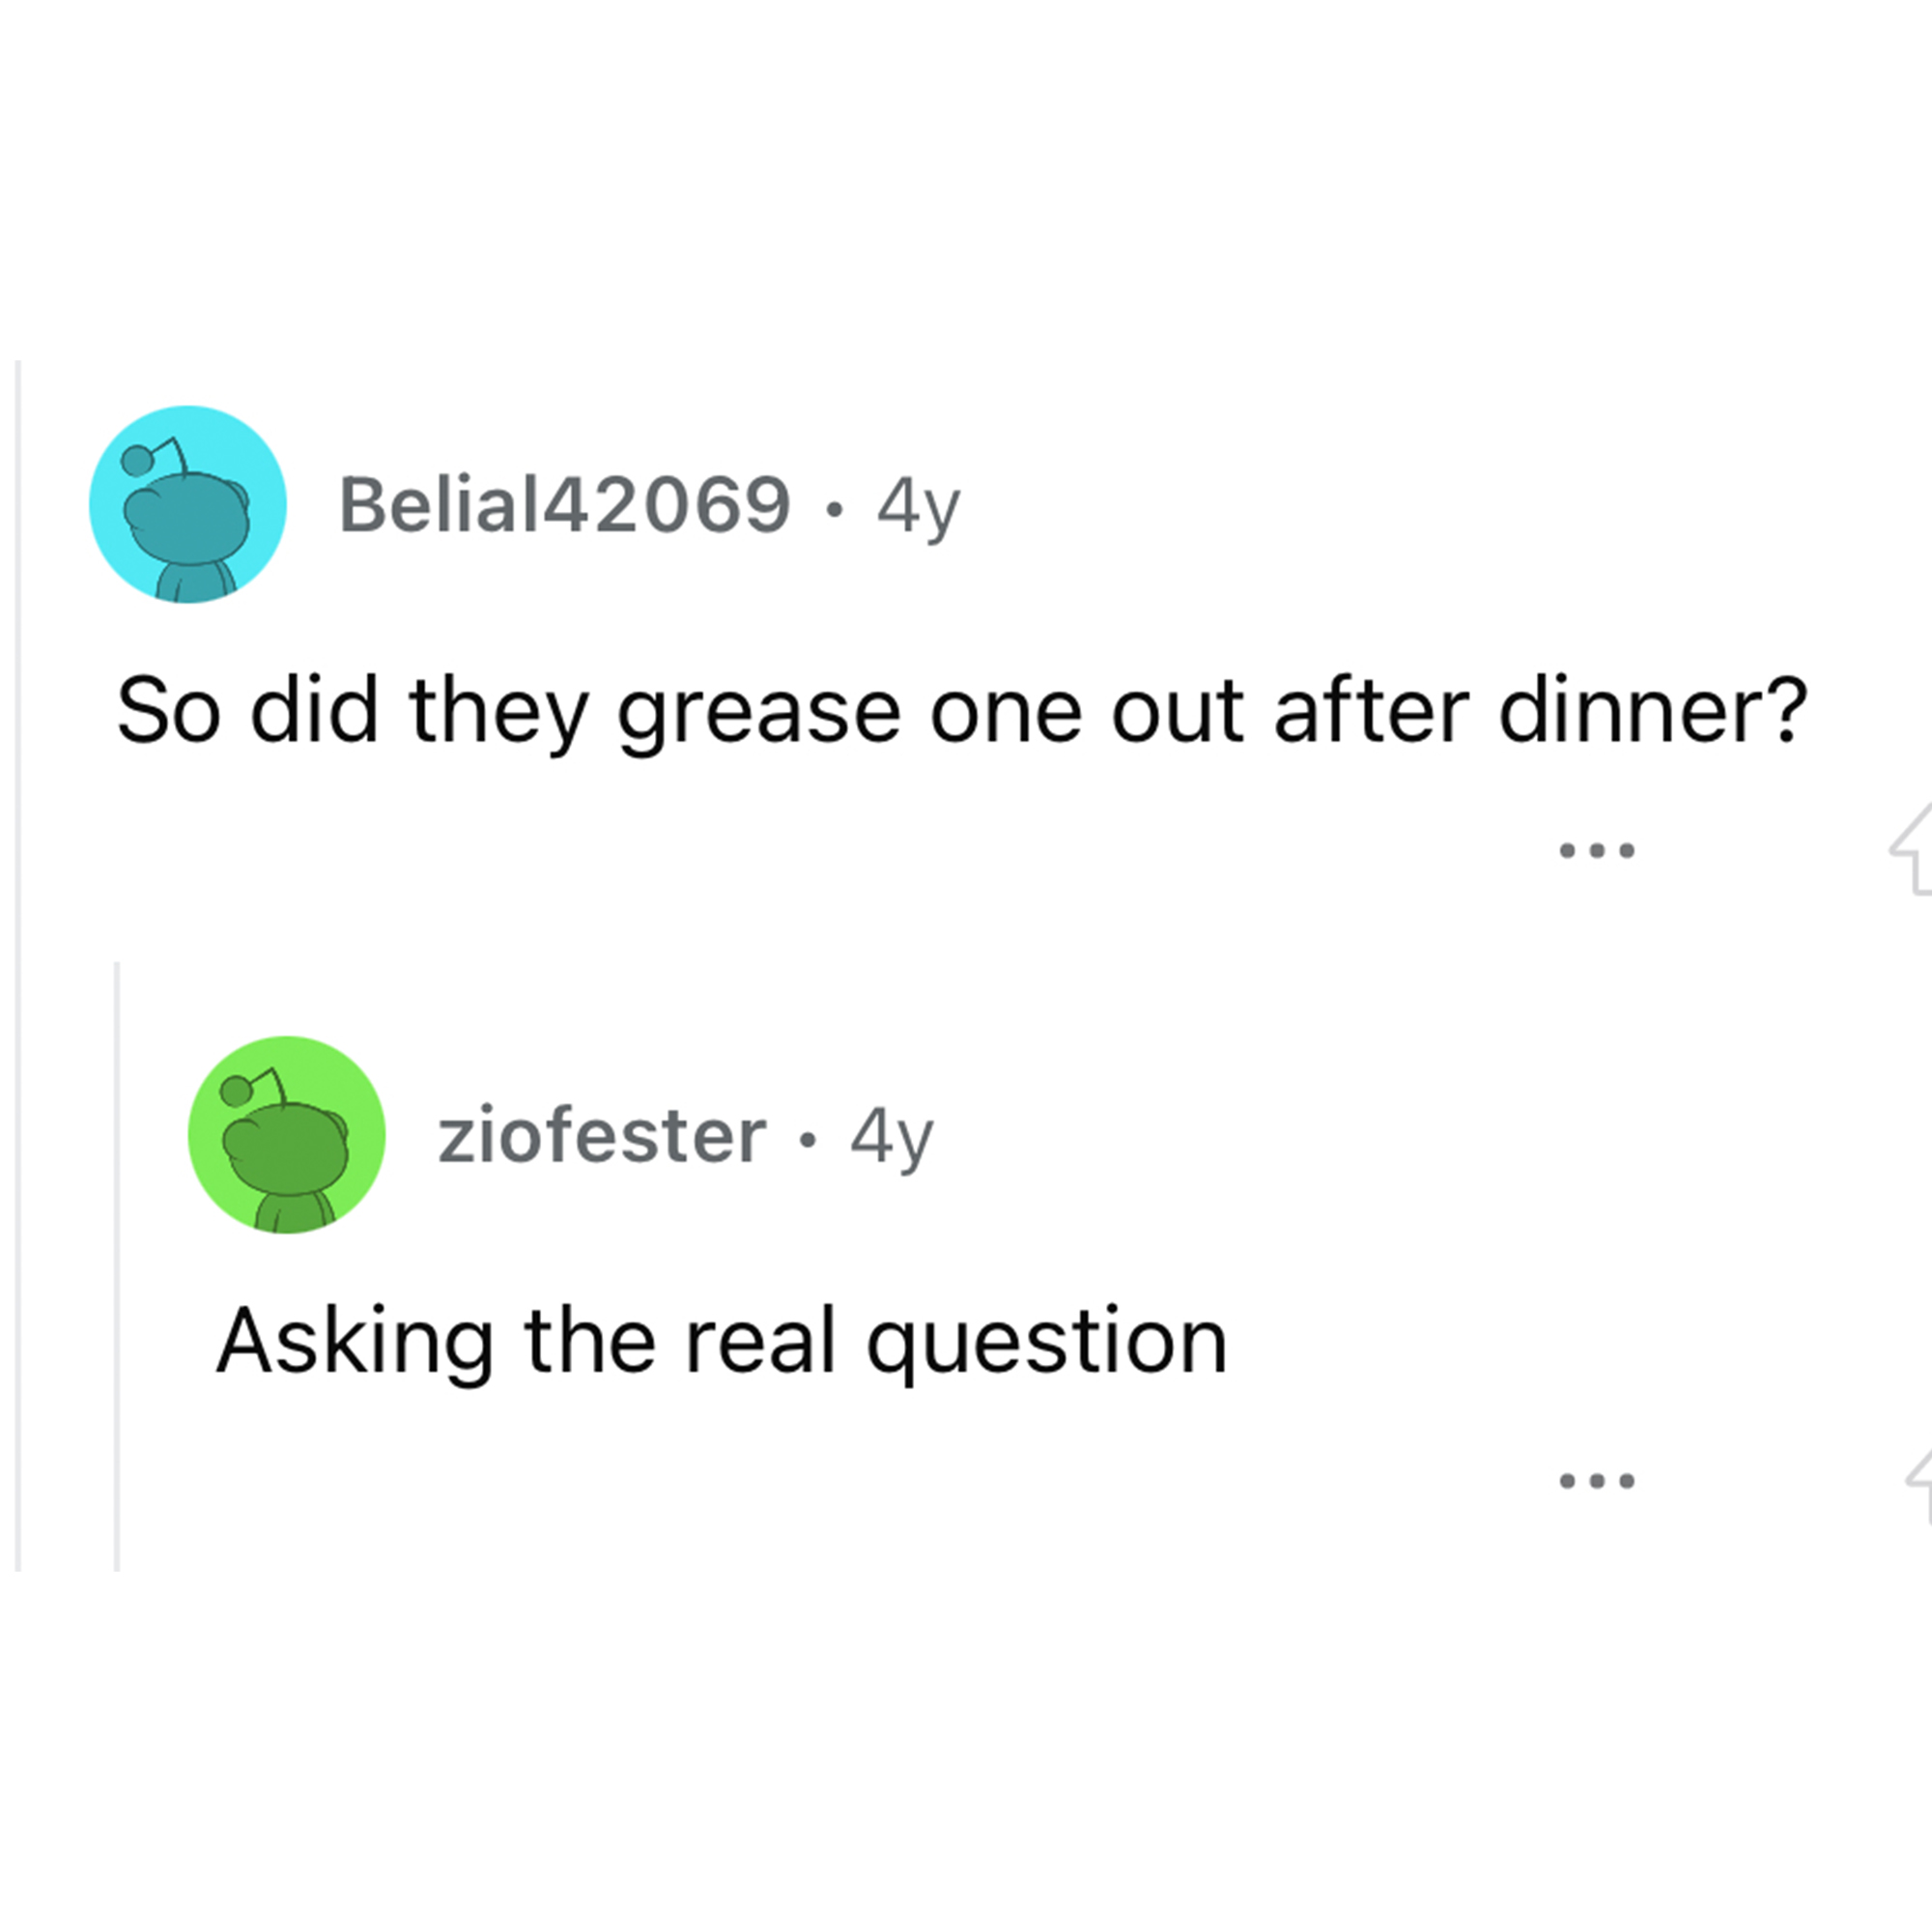 Reddit thread, Man cooks for escort - angle - Belial42069 4y So did they grease one out after dinner? ziofester 4y Asking the real question { 2